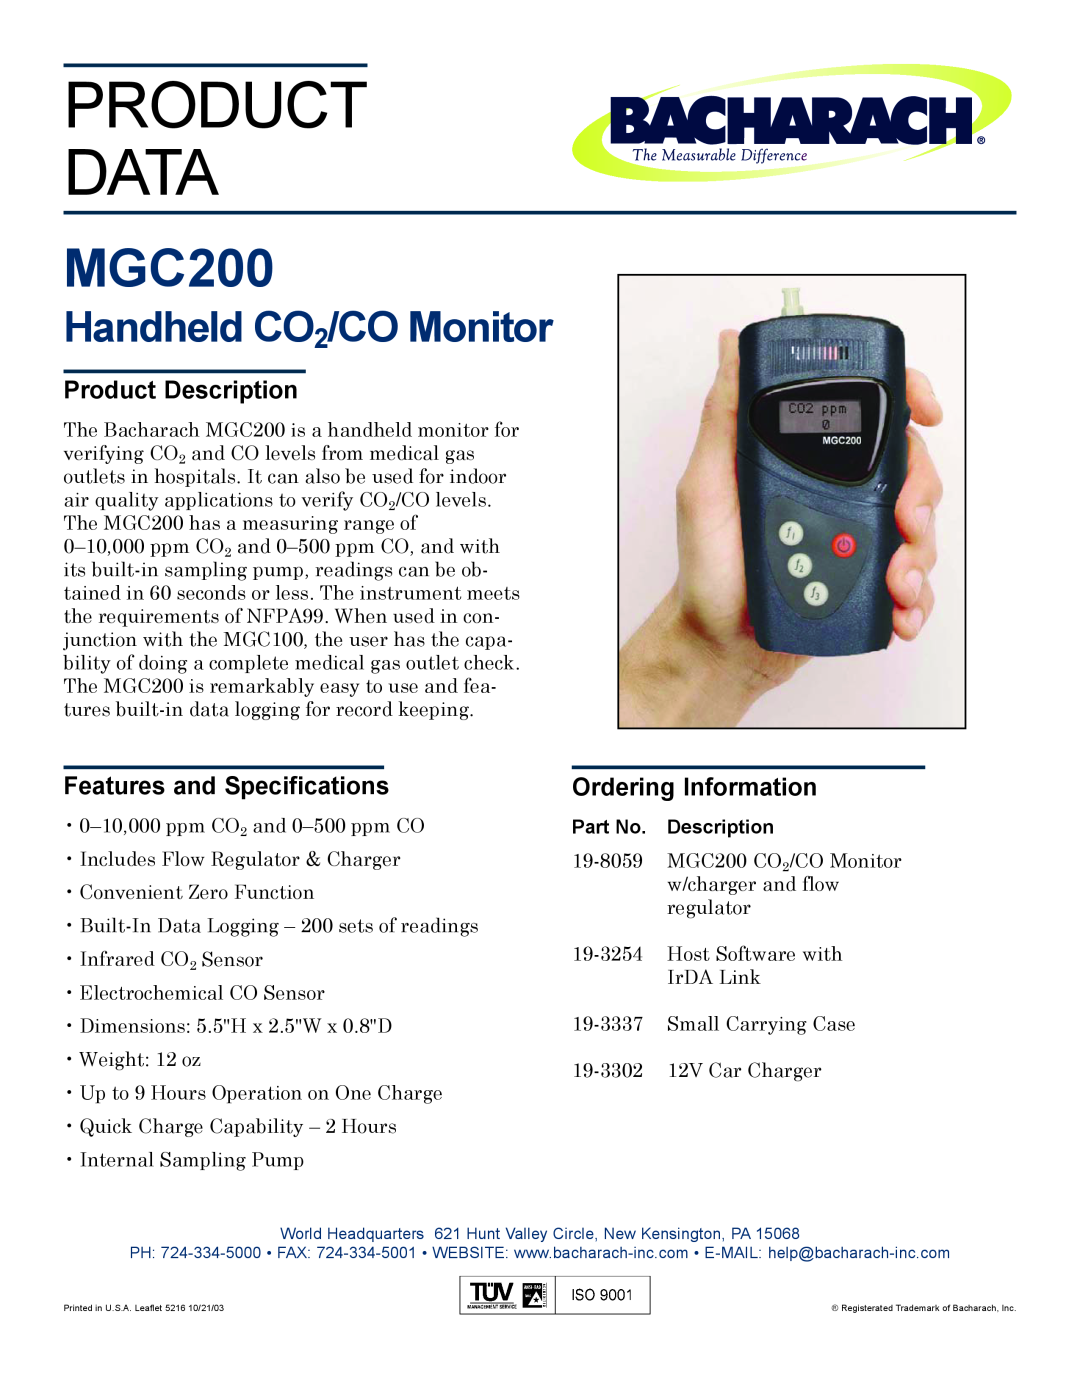 Bacharach MGC200 specifications Product Data, Handheld CO2/CO Monitor, Product Description, Features and Specifications 